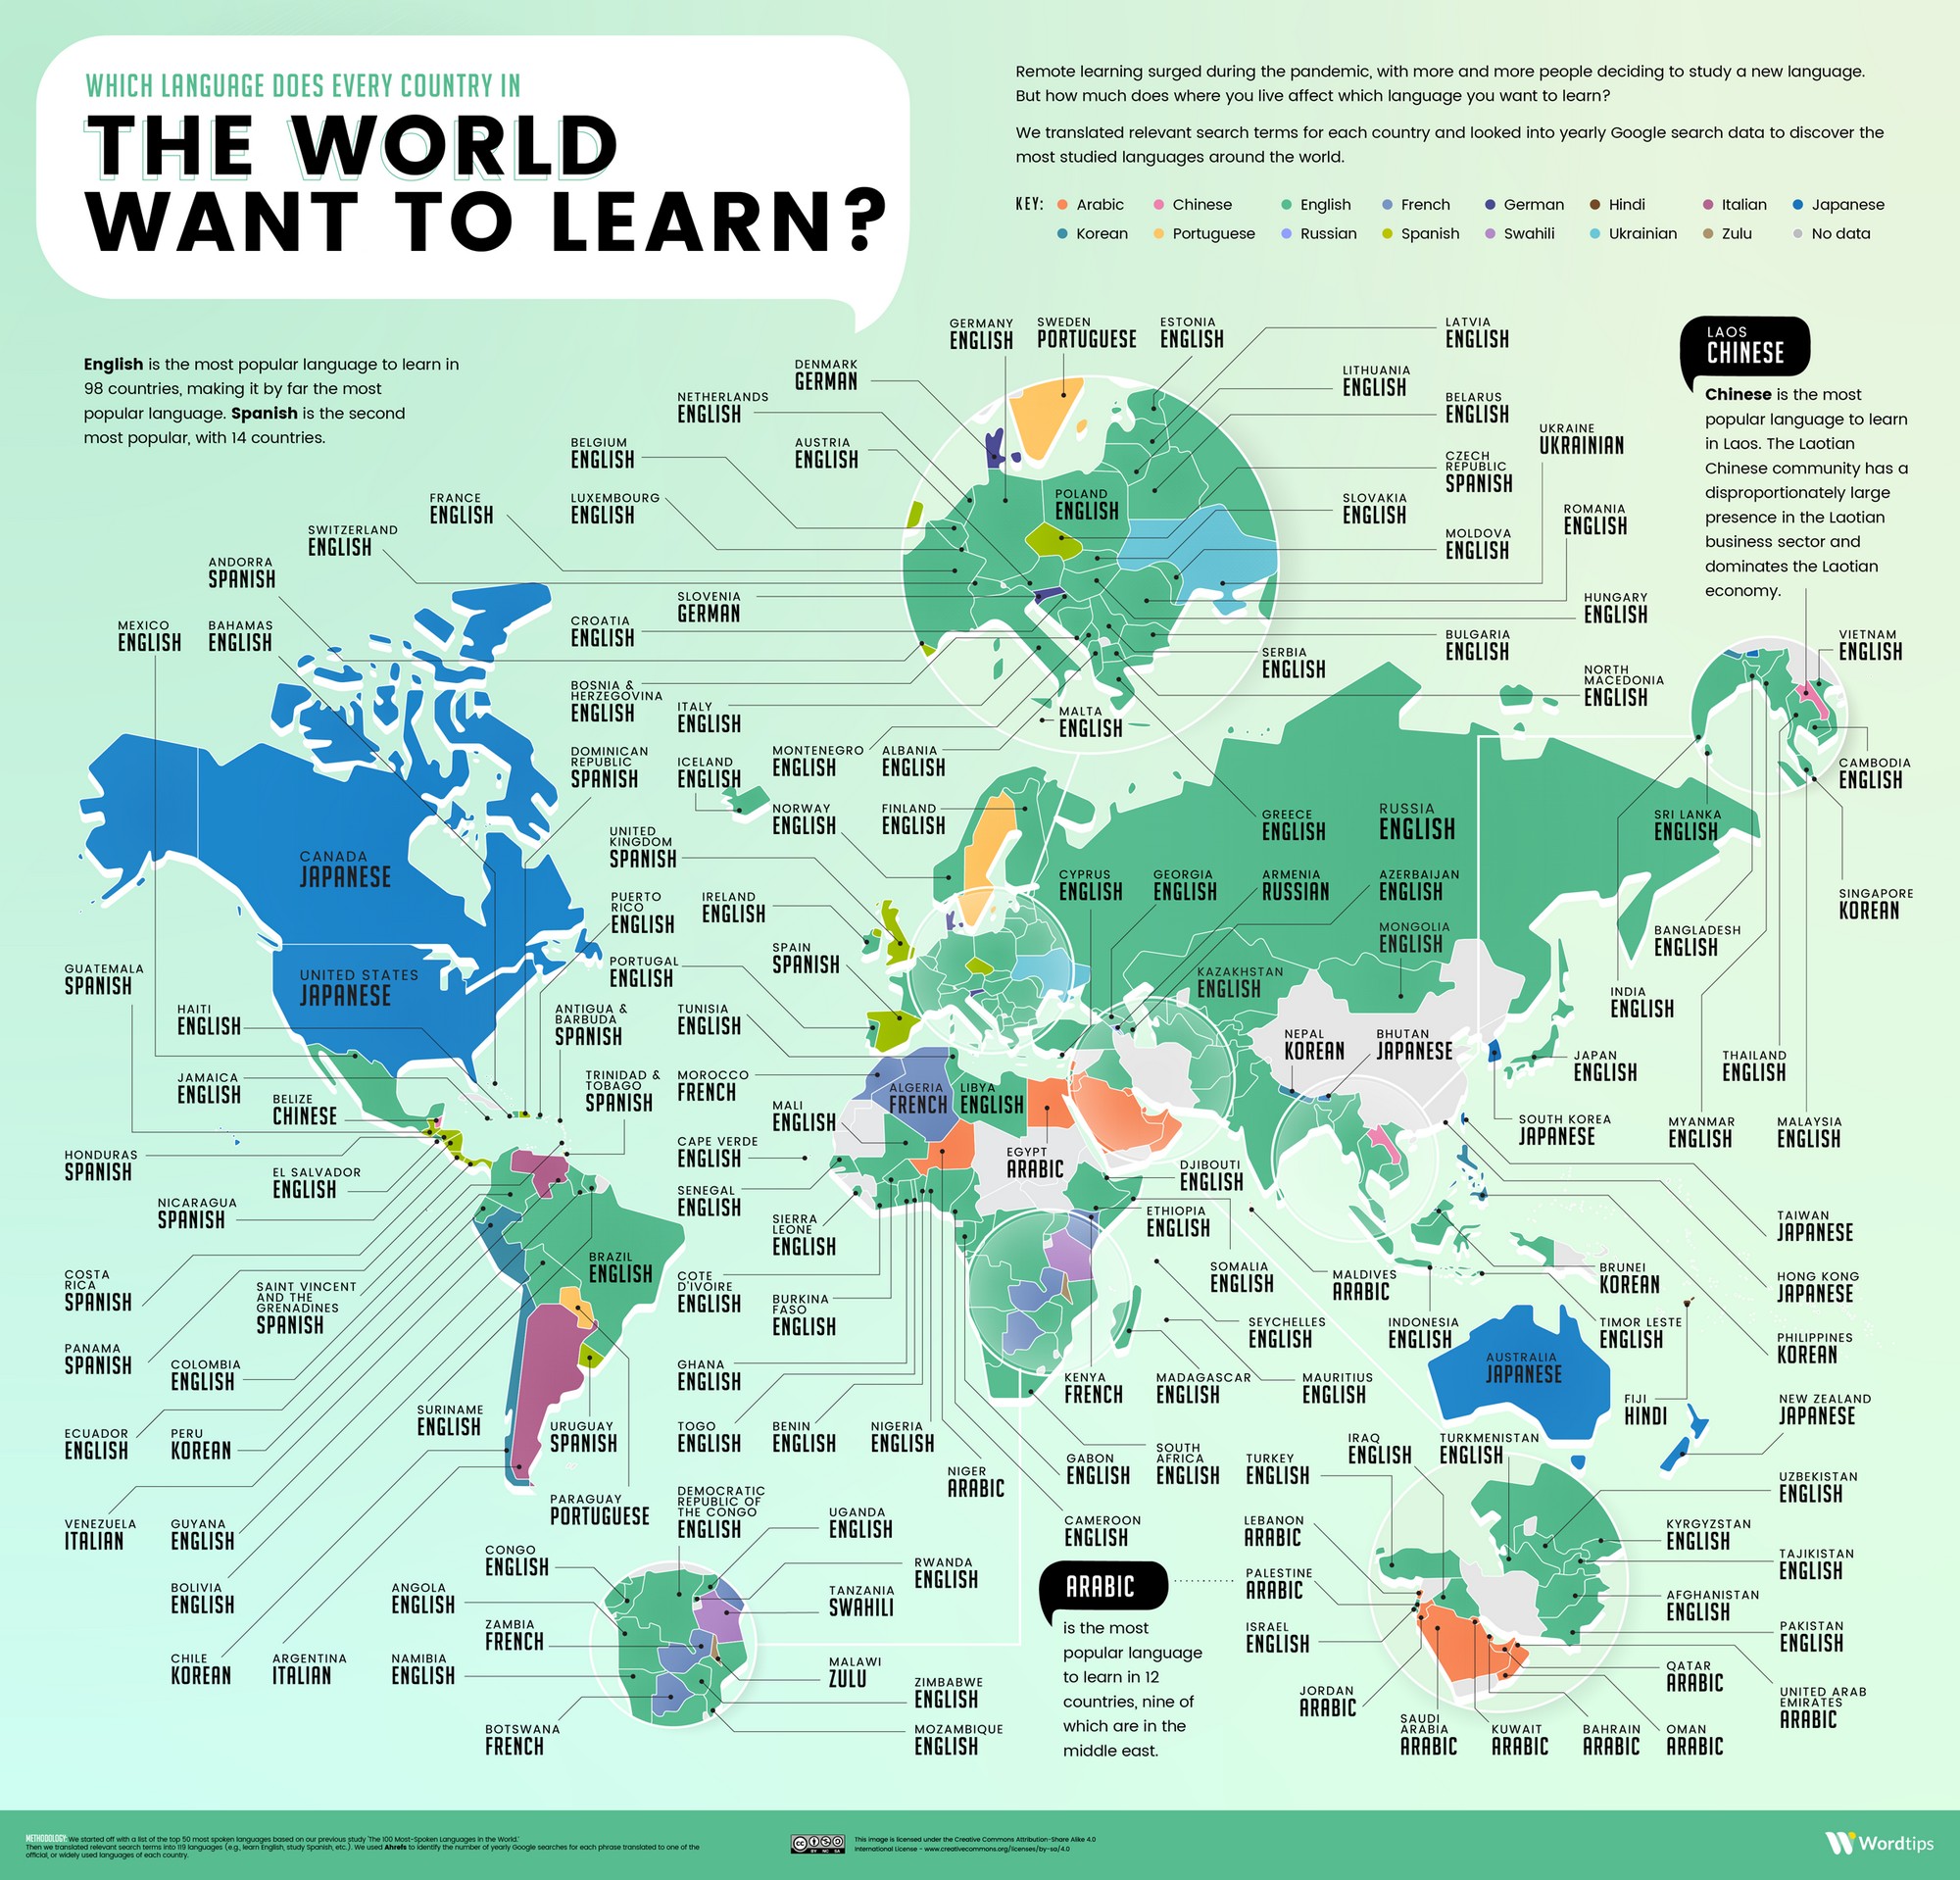 Which language does every country want to learn? Vivid Maps